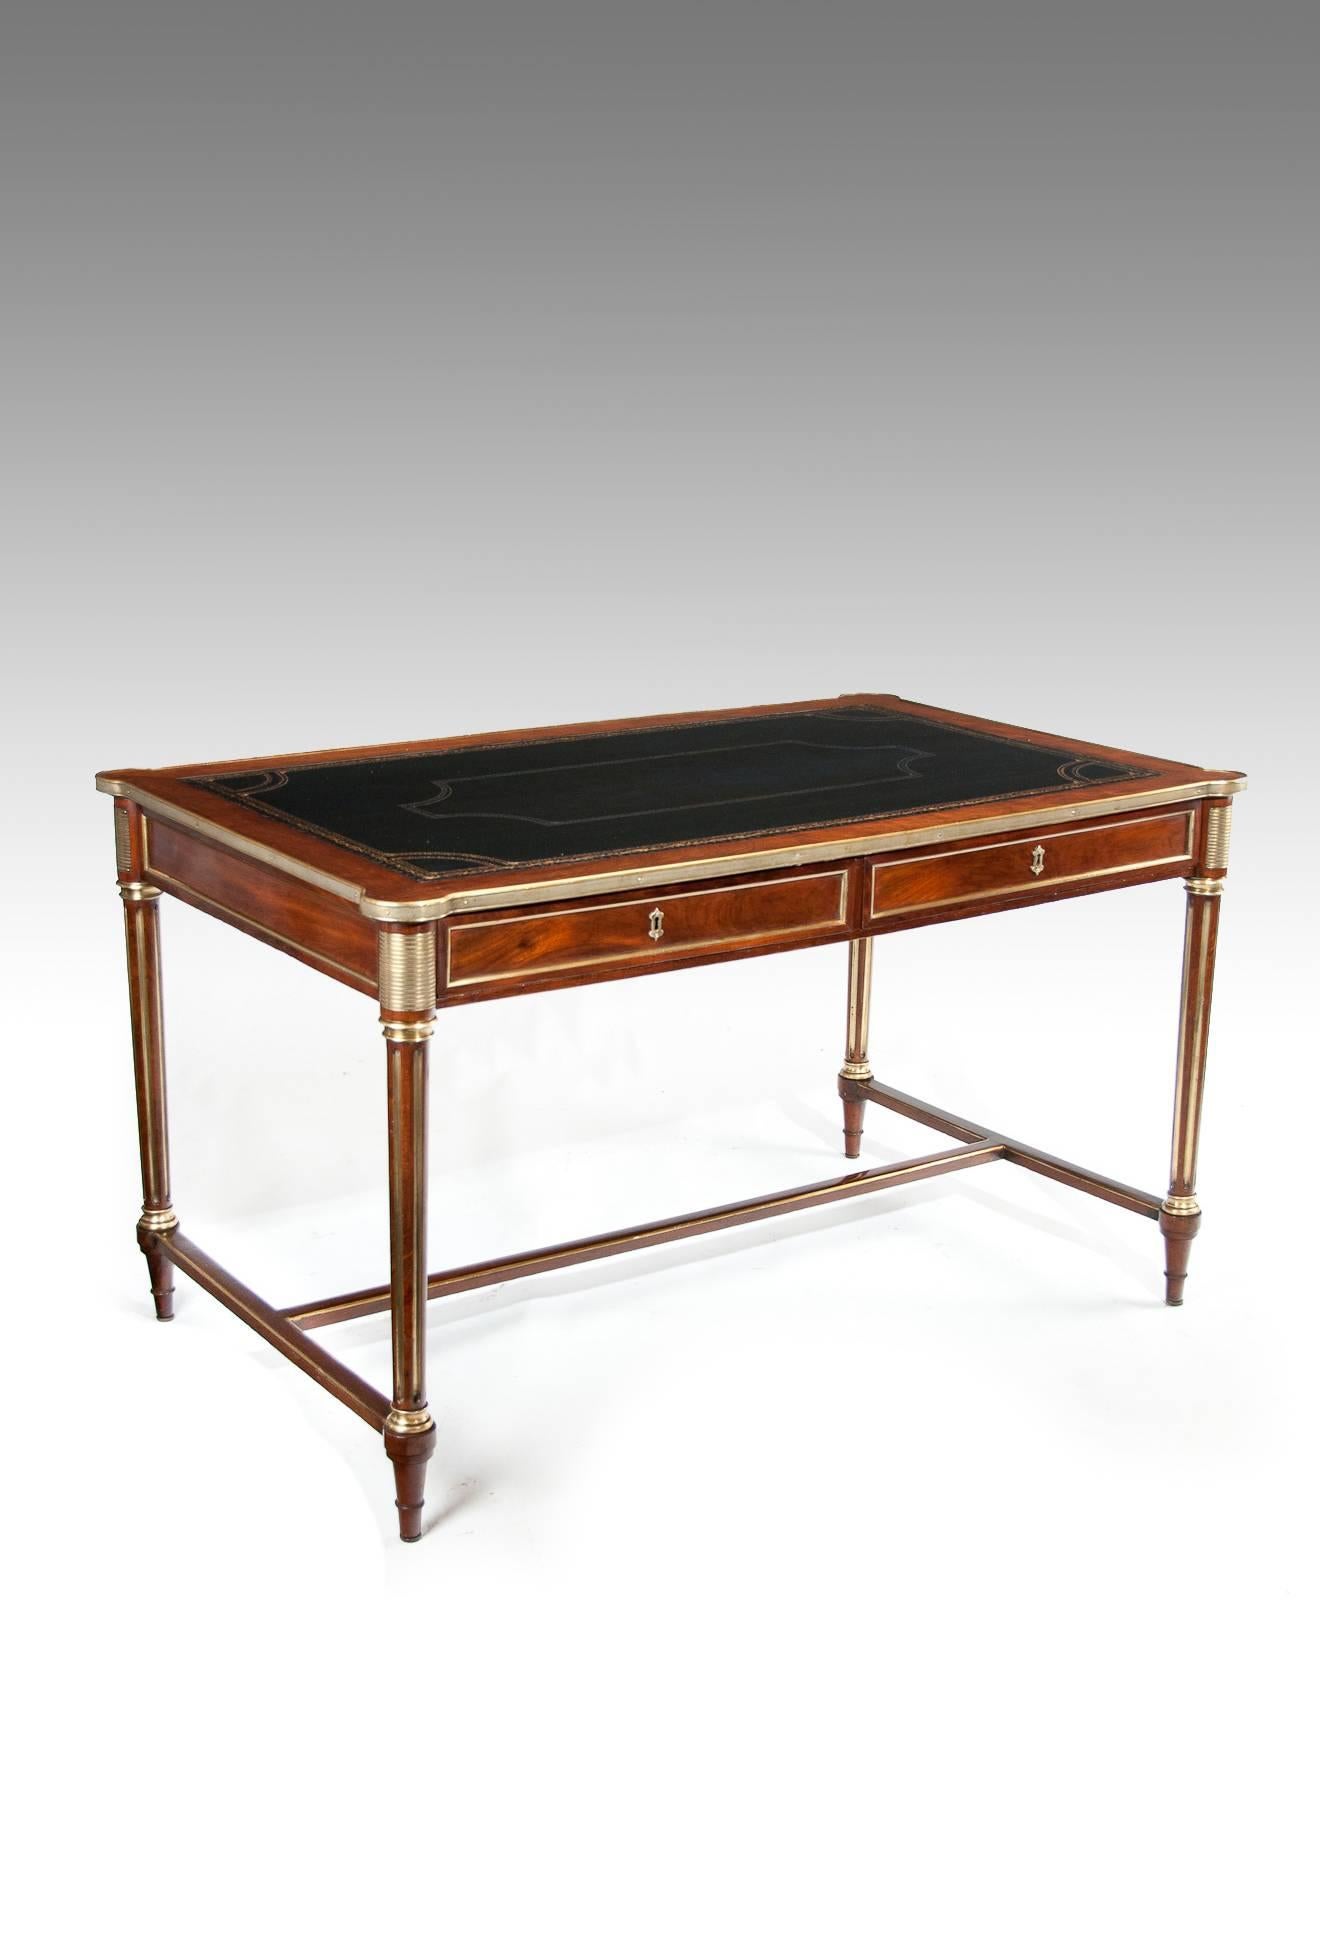 A very elegant and fine quality French mahogany and brass bound two drawer writing table with H framed stretcher in the Louis XVI manner, circa 1860-1870
The rectangular top with shaped corners having a newly fitted dark navy gilt and blind tooled